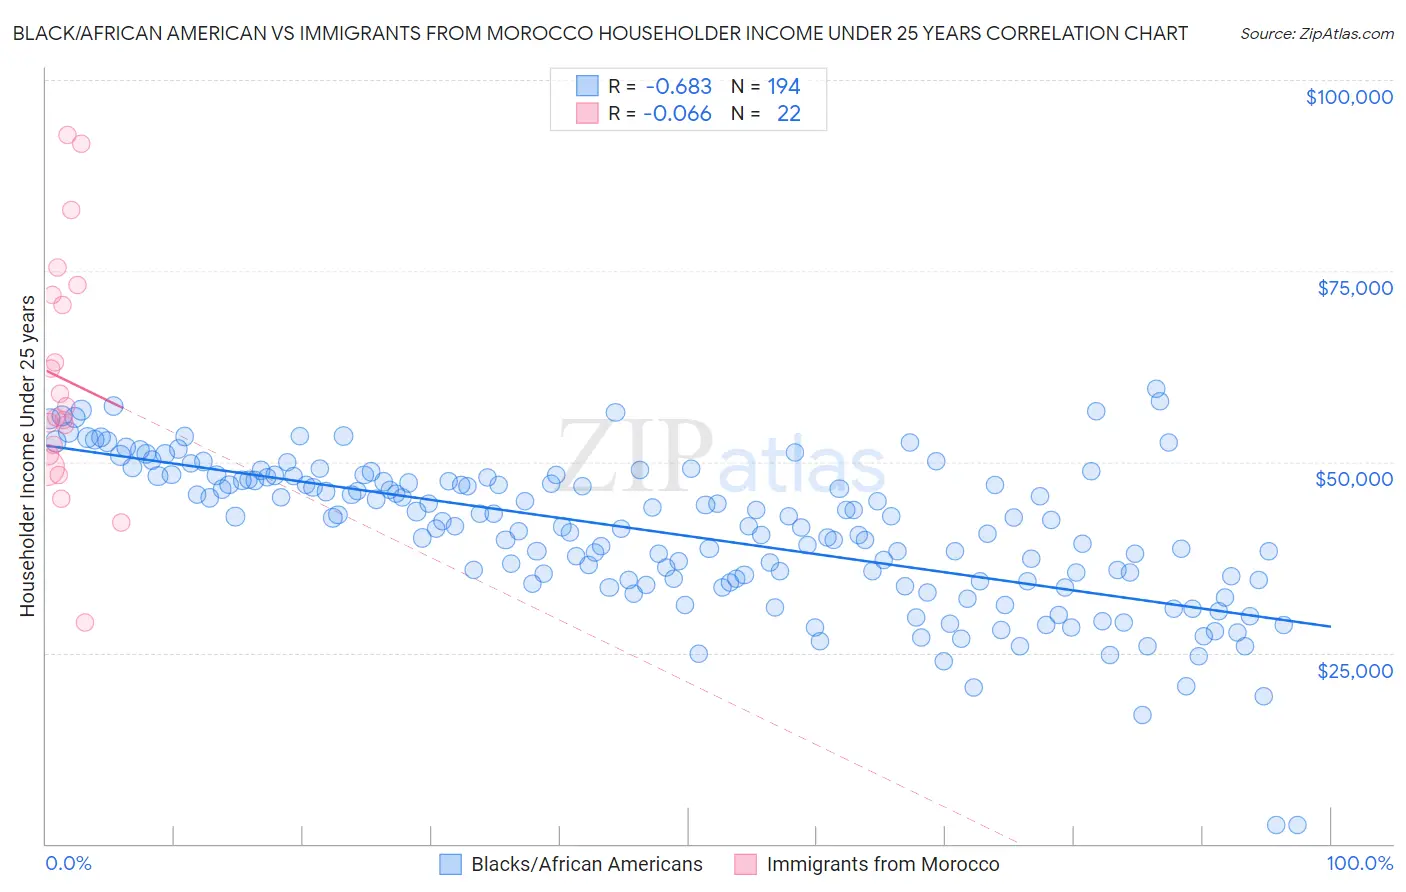 Black/African American vs Immigrants from Morocco Householder Income Under 25 years